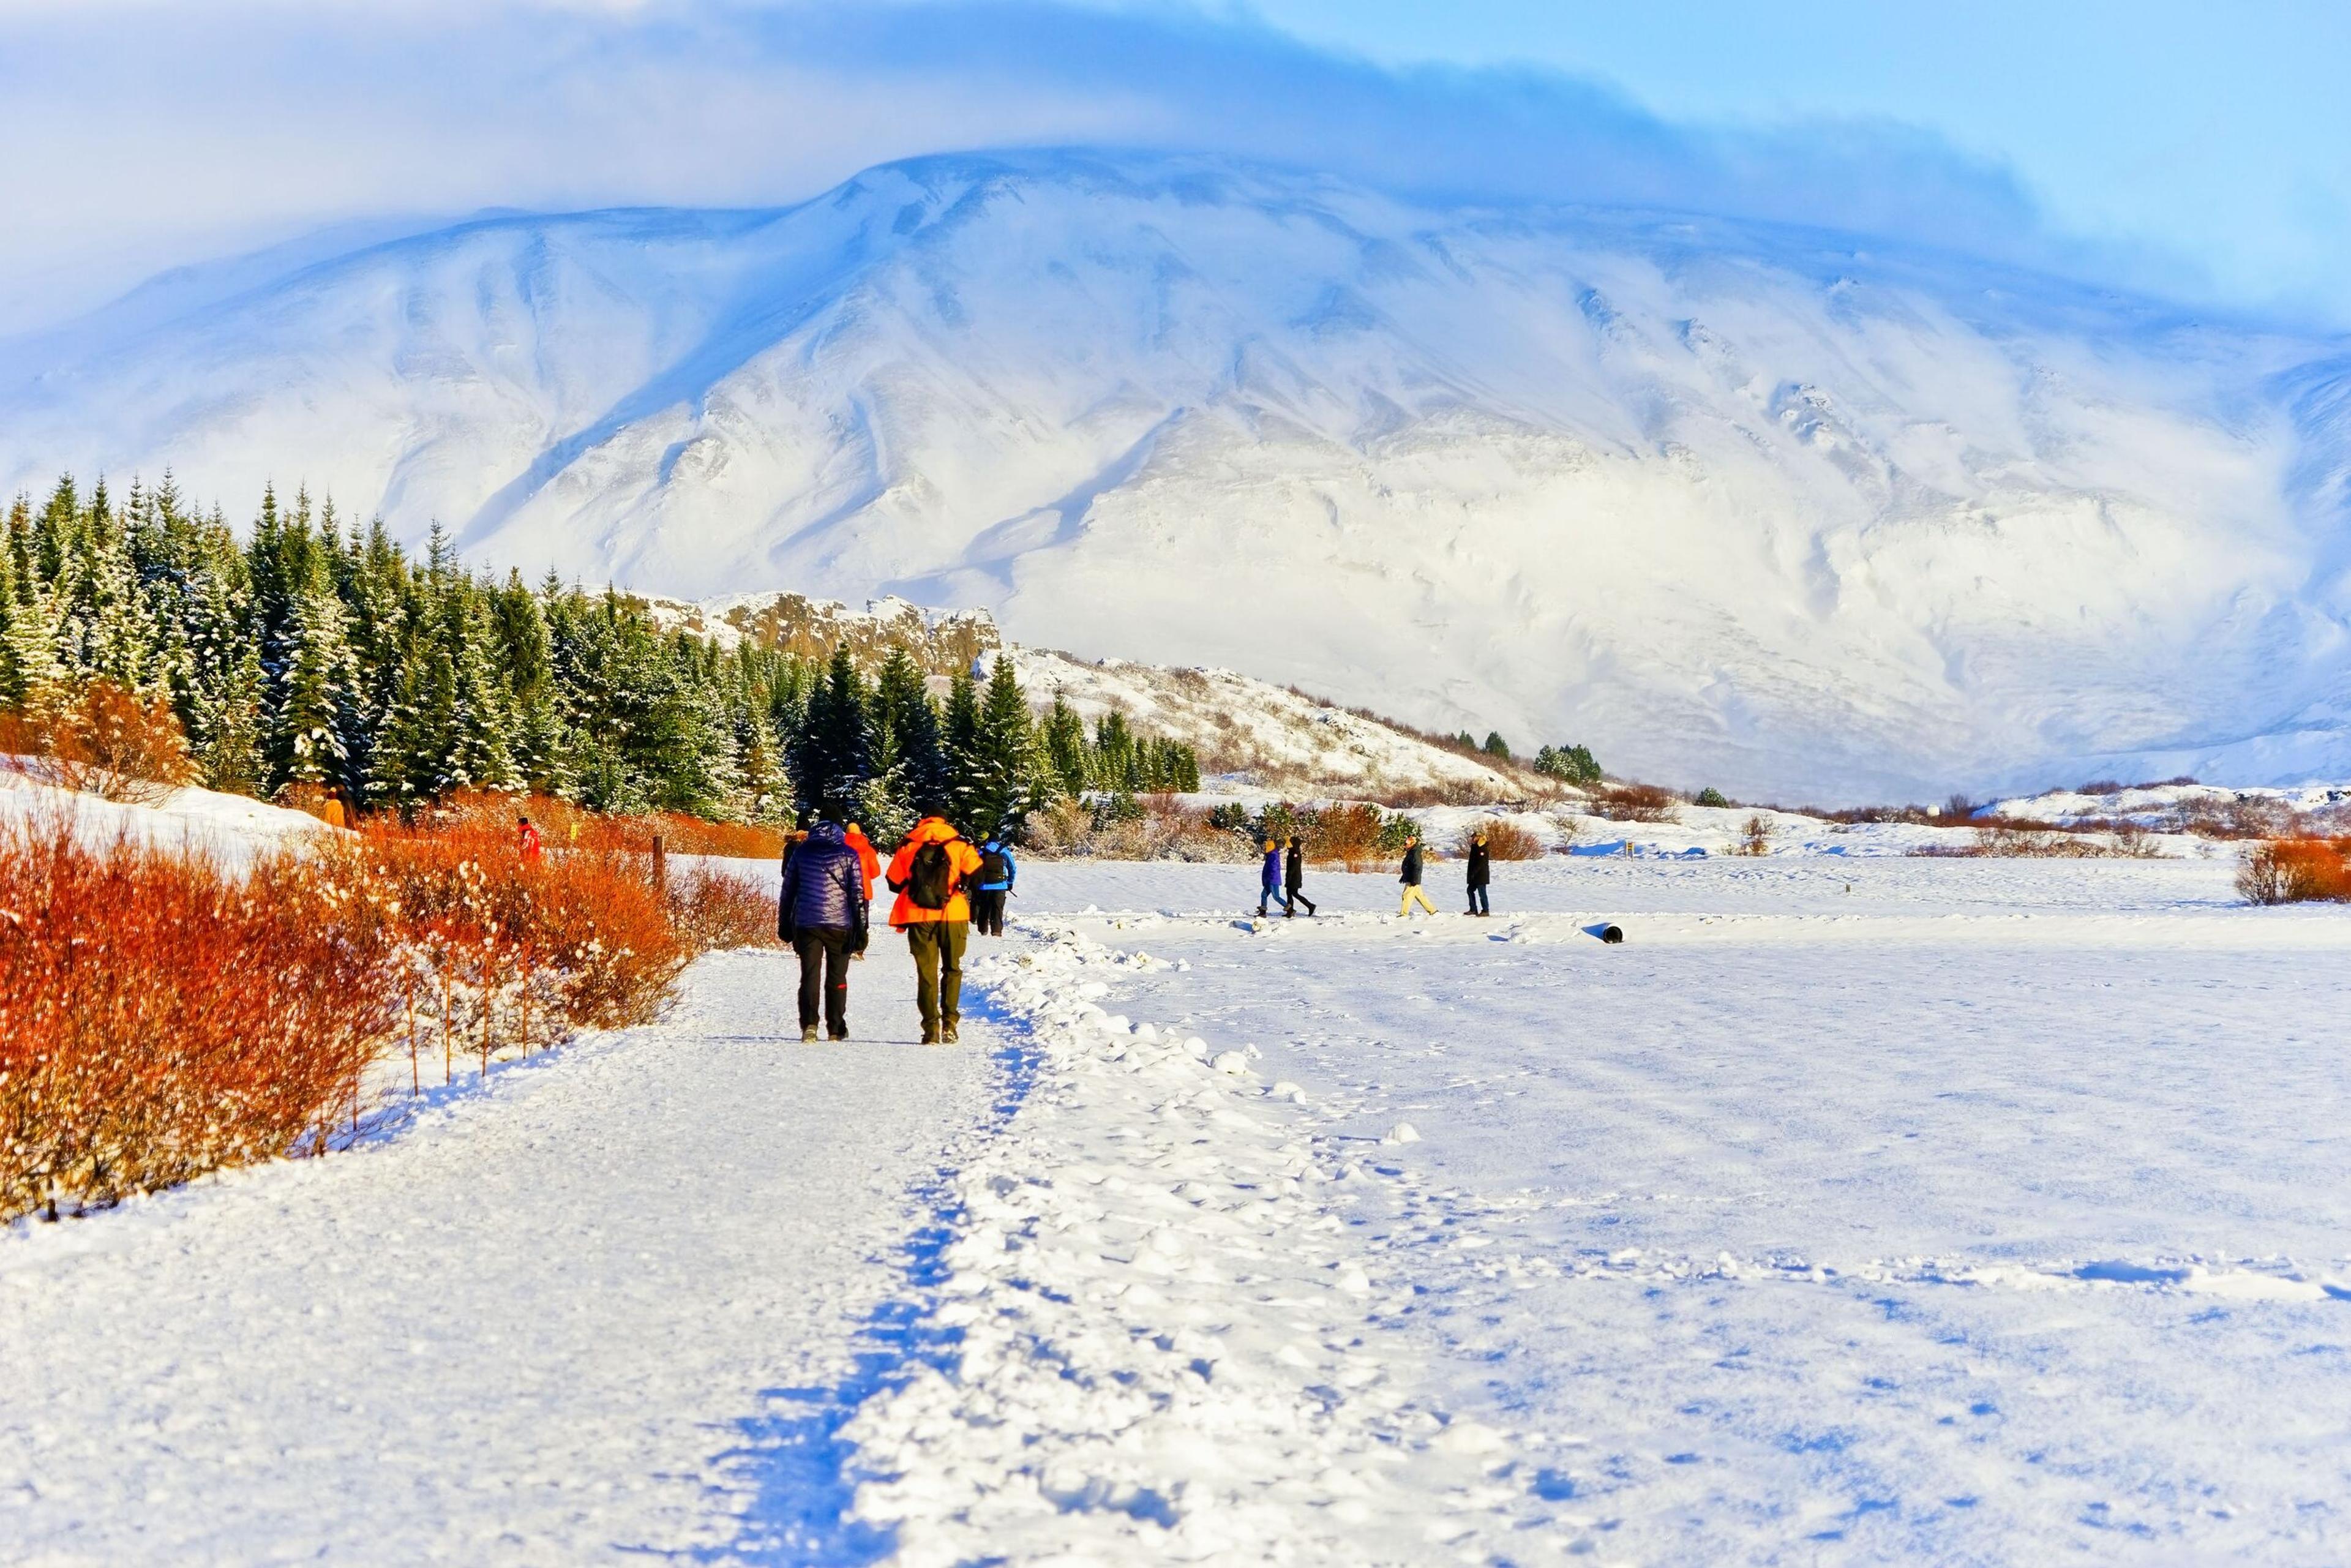 Hikers in colorful gear trek along a snowy path flanked by autumn-colored shrubs, with a backdrop of majestic snow-covered mountains under a bright blue sky, a vivid depiction of winter adventures.